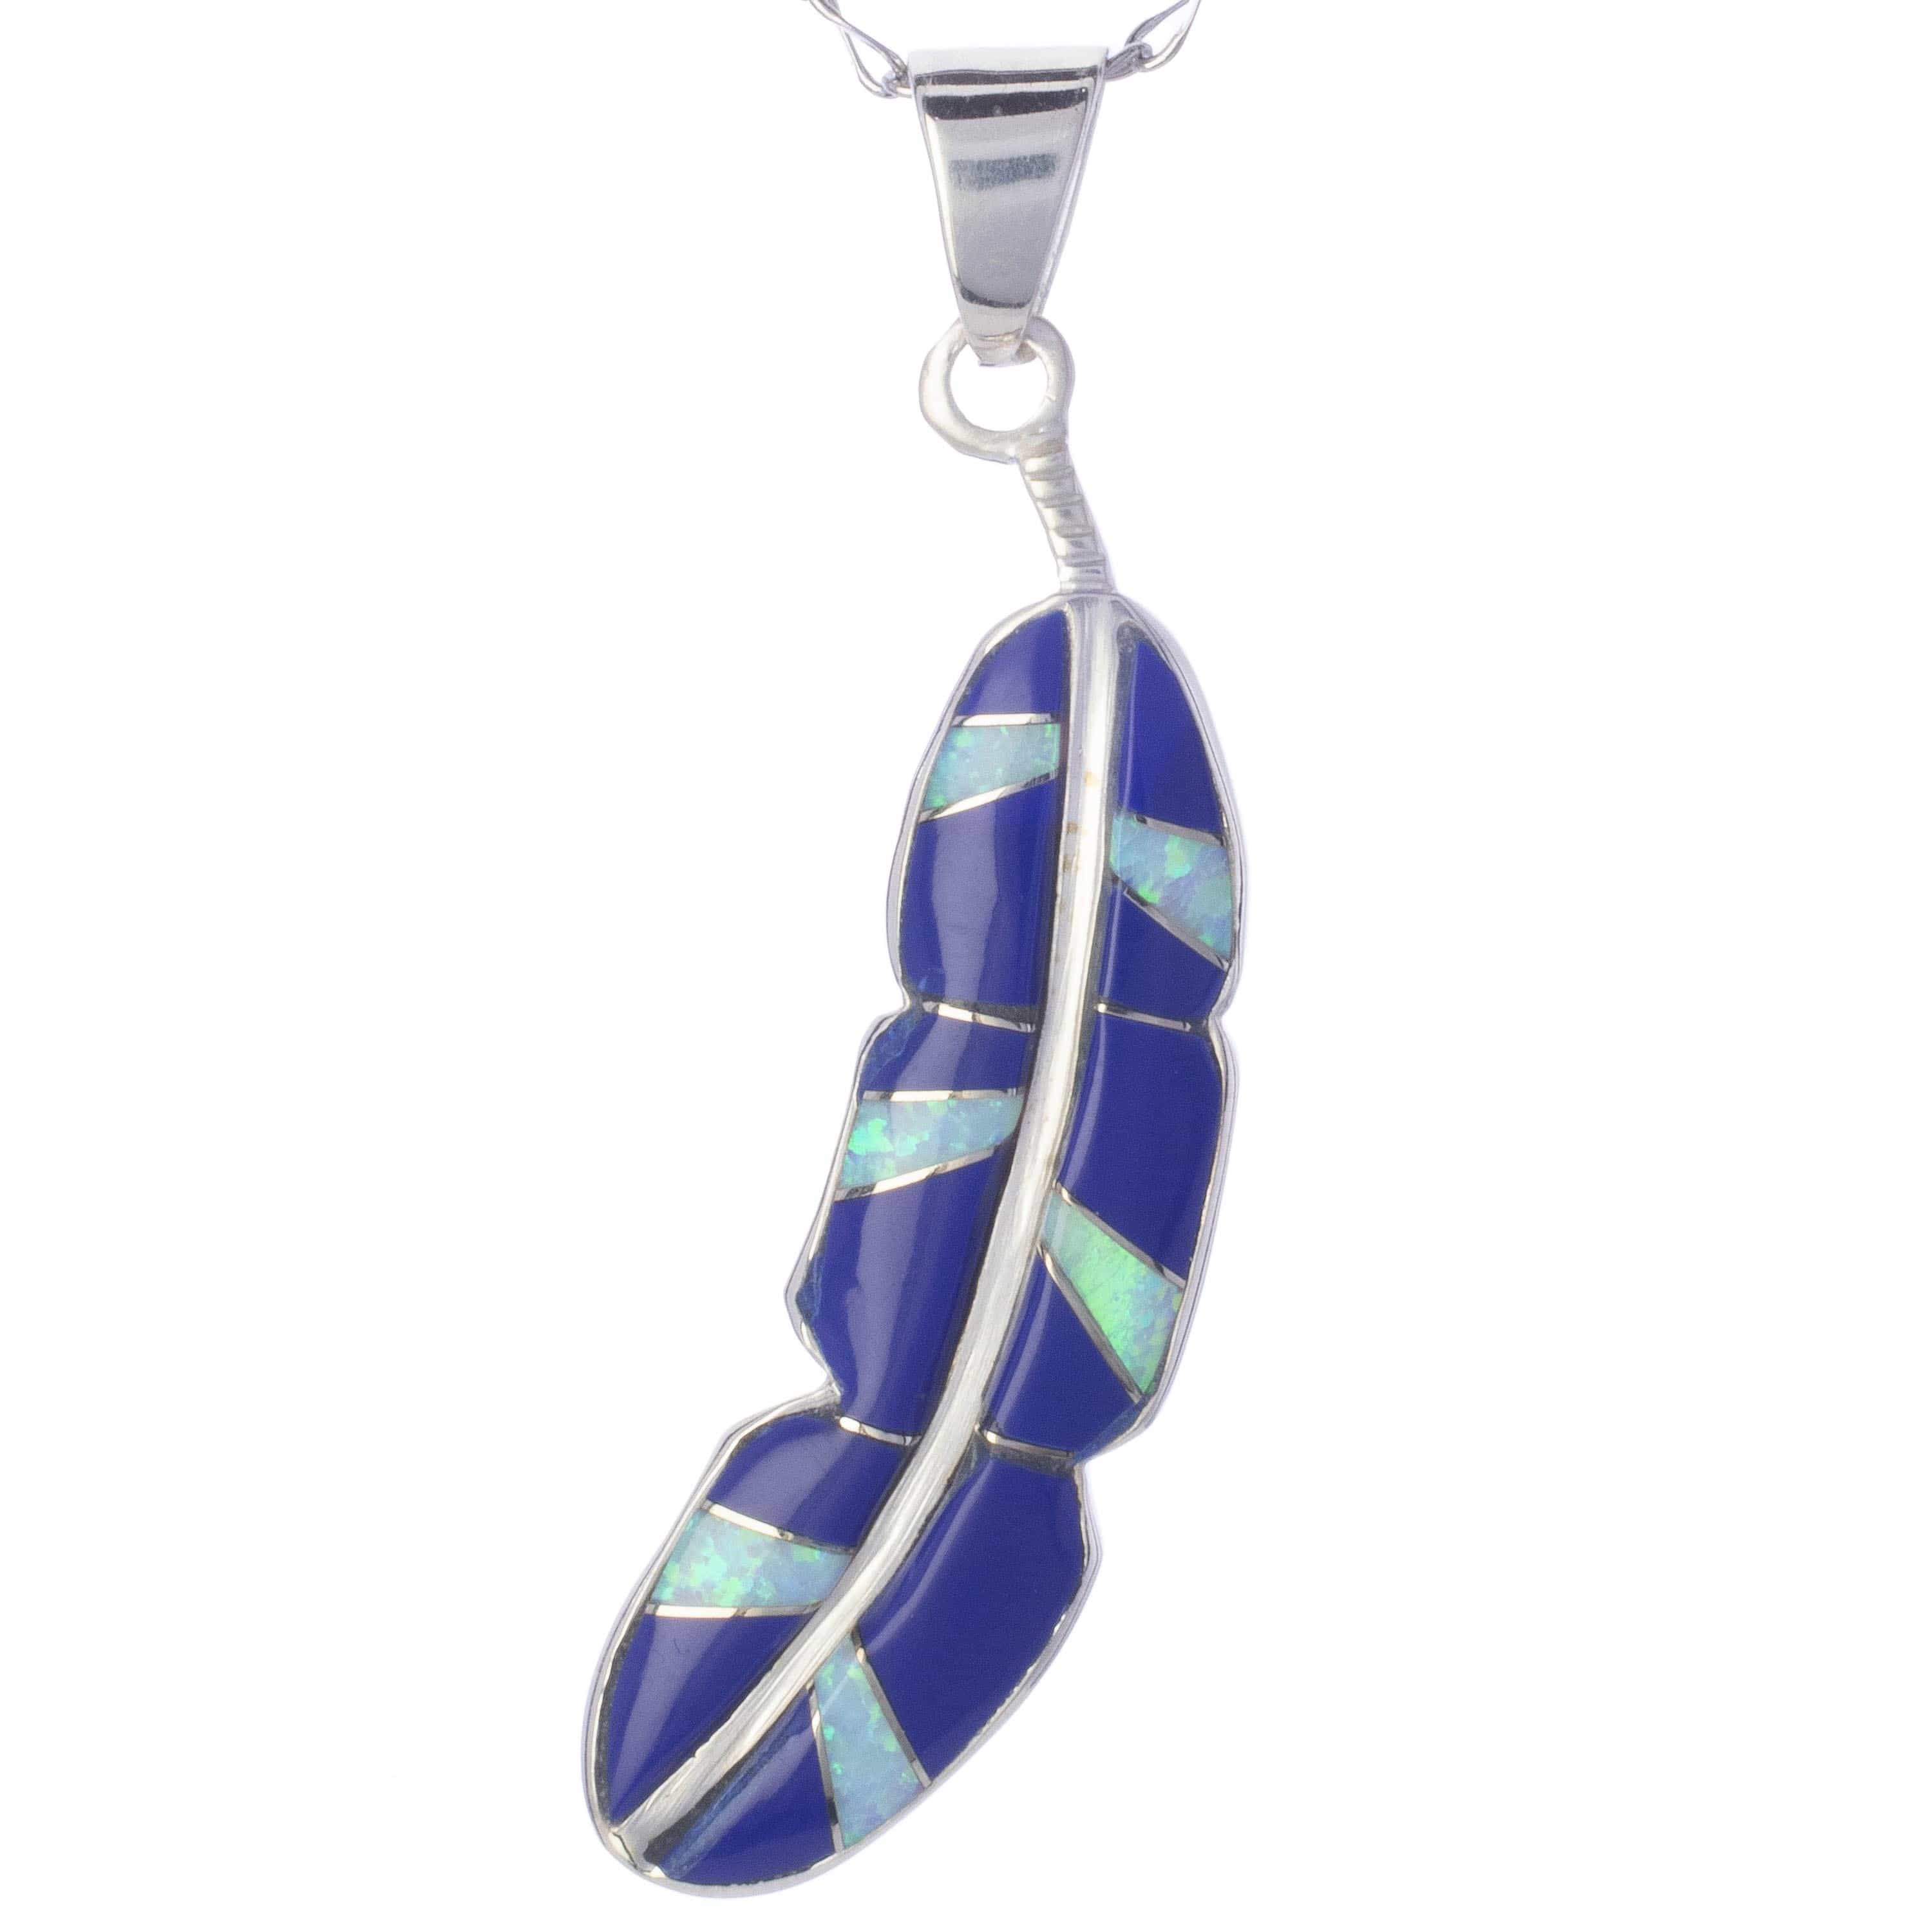 Kalifano Southwest Silver Jewelry Lapis Feather 925 Sterling Silver Pendant USA Handmade with Opal Accent NMN.2312.LP